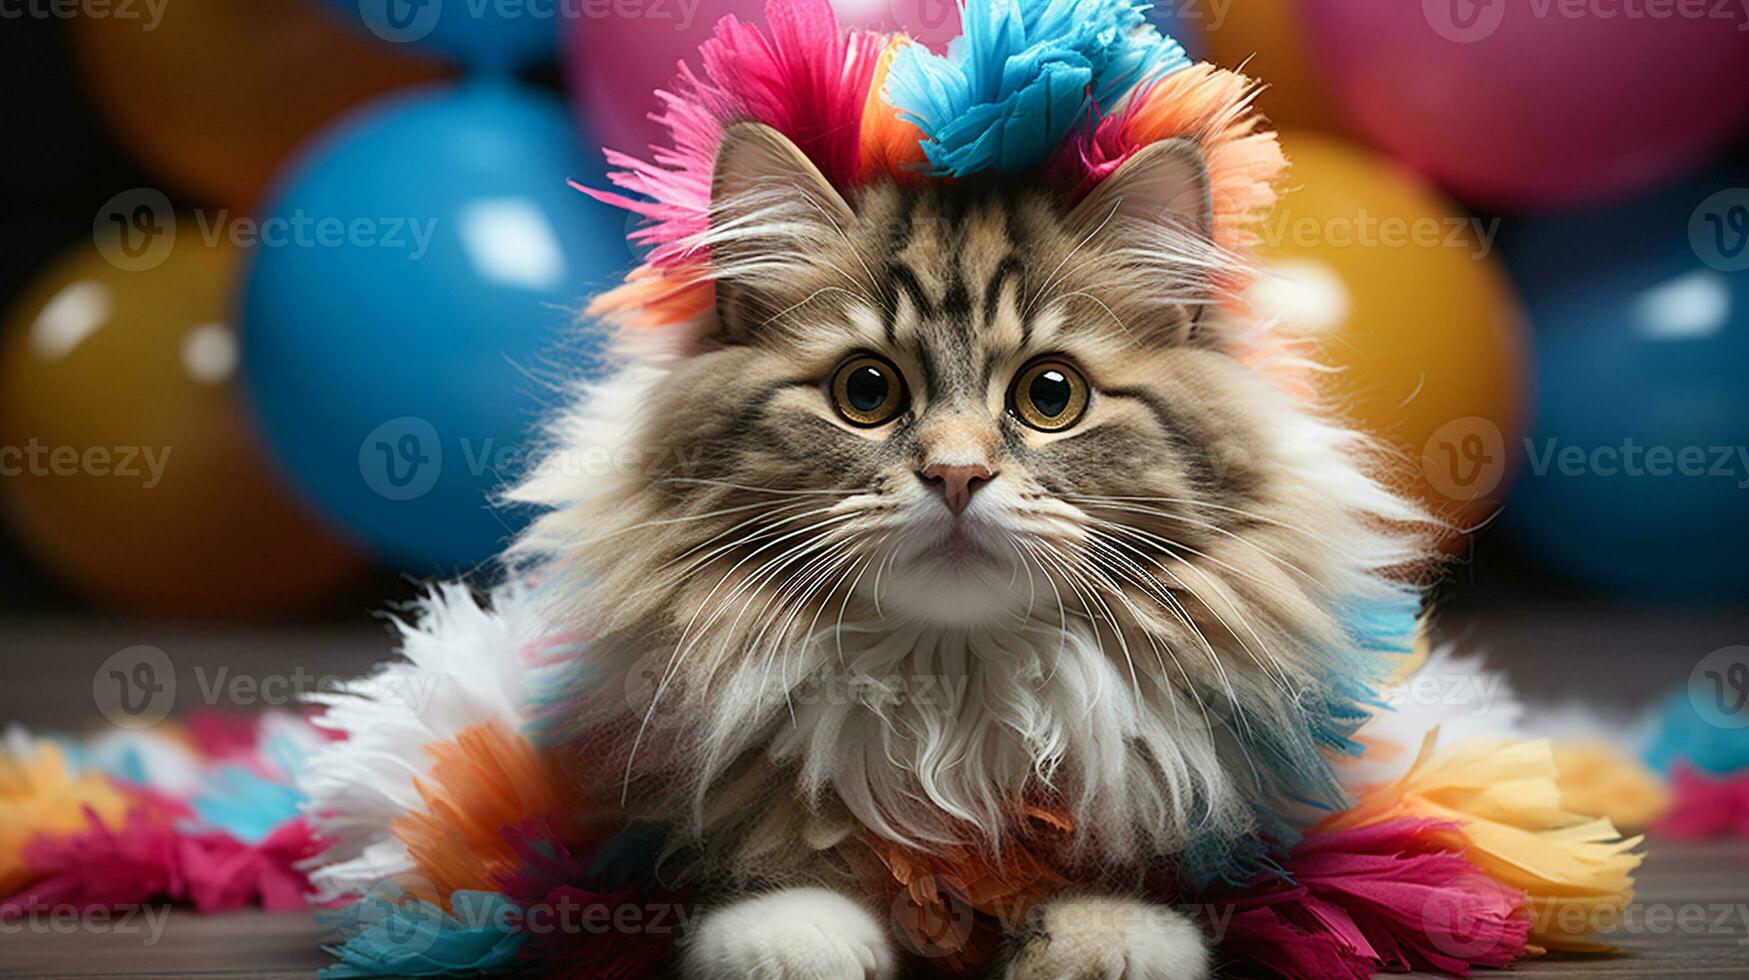 AI generated Fluffy cat with colorful feather boa, vibrant party balloons background, adorable feline portrait photo